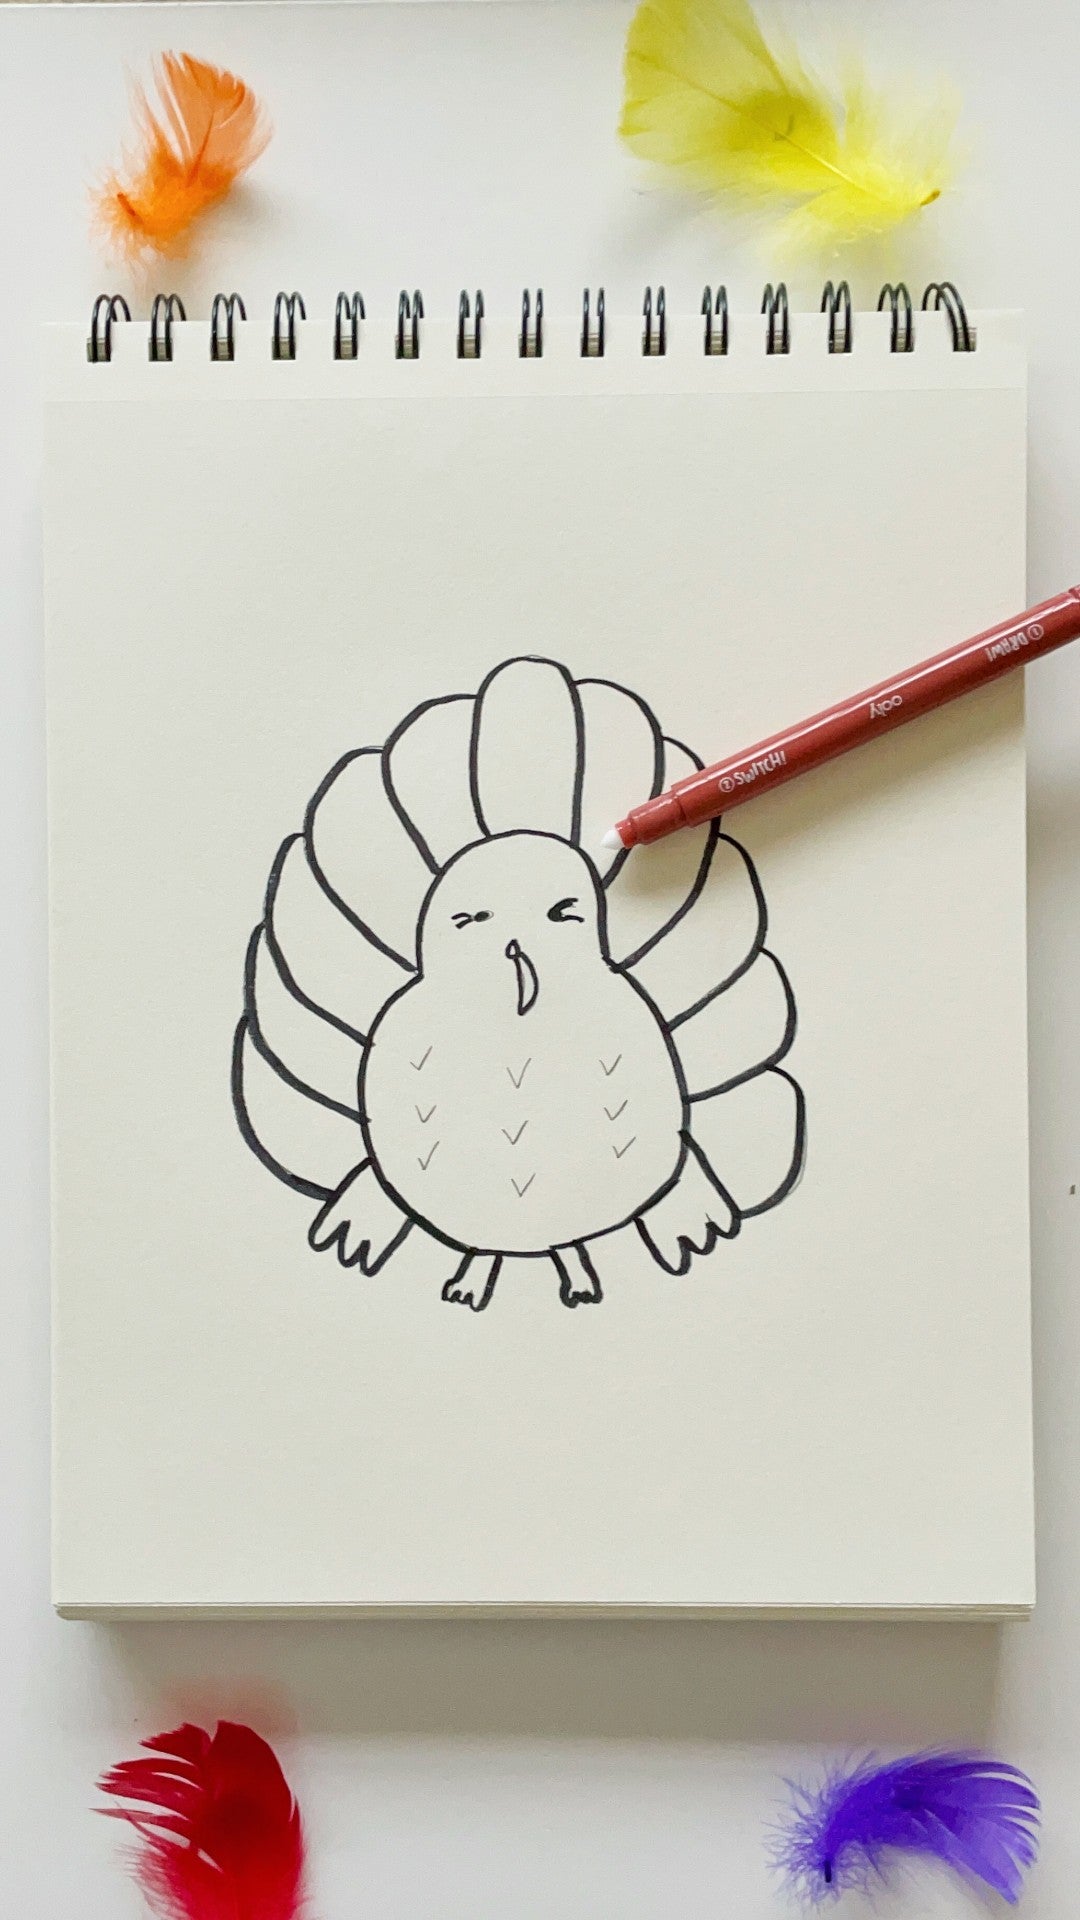 Sketchbook with marker on top of an outlined turkey with colorful feathers